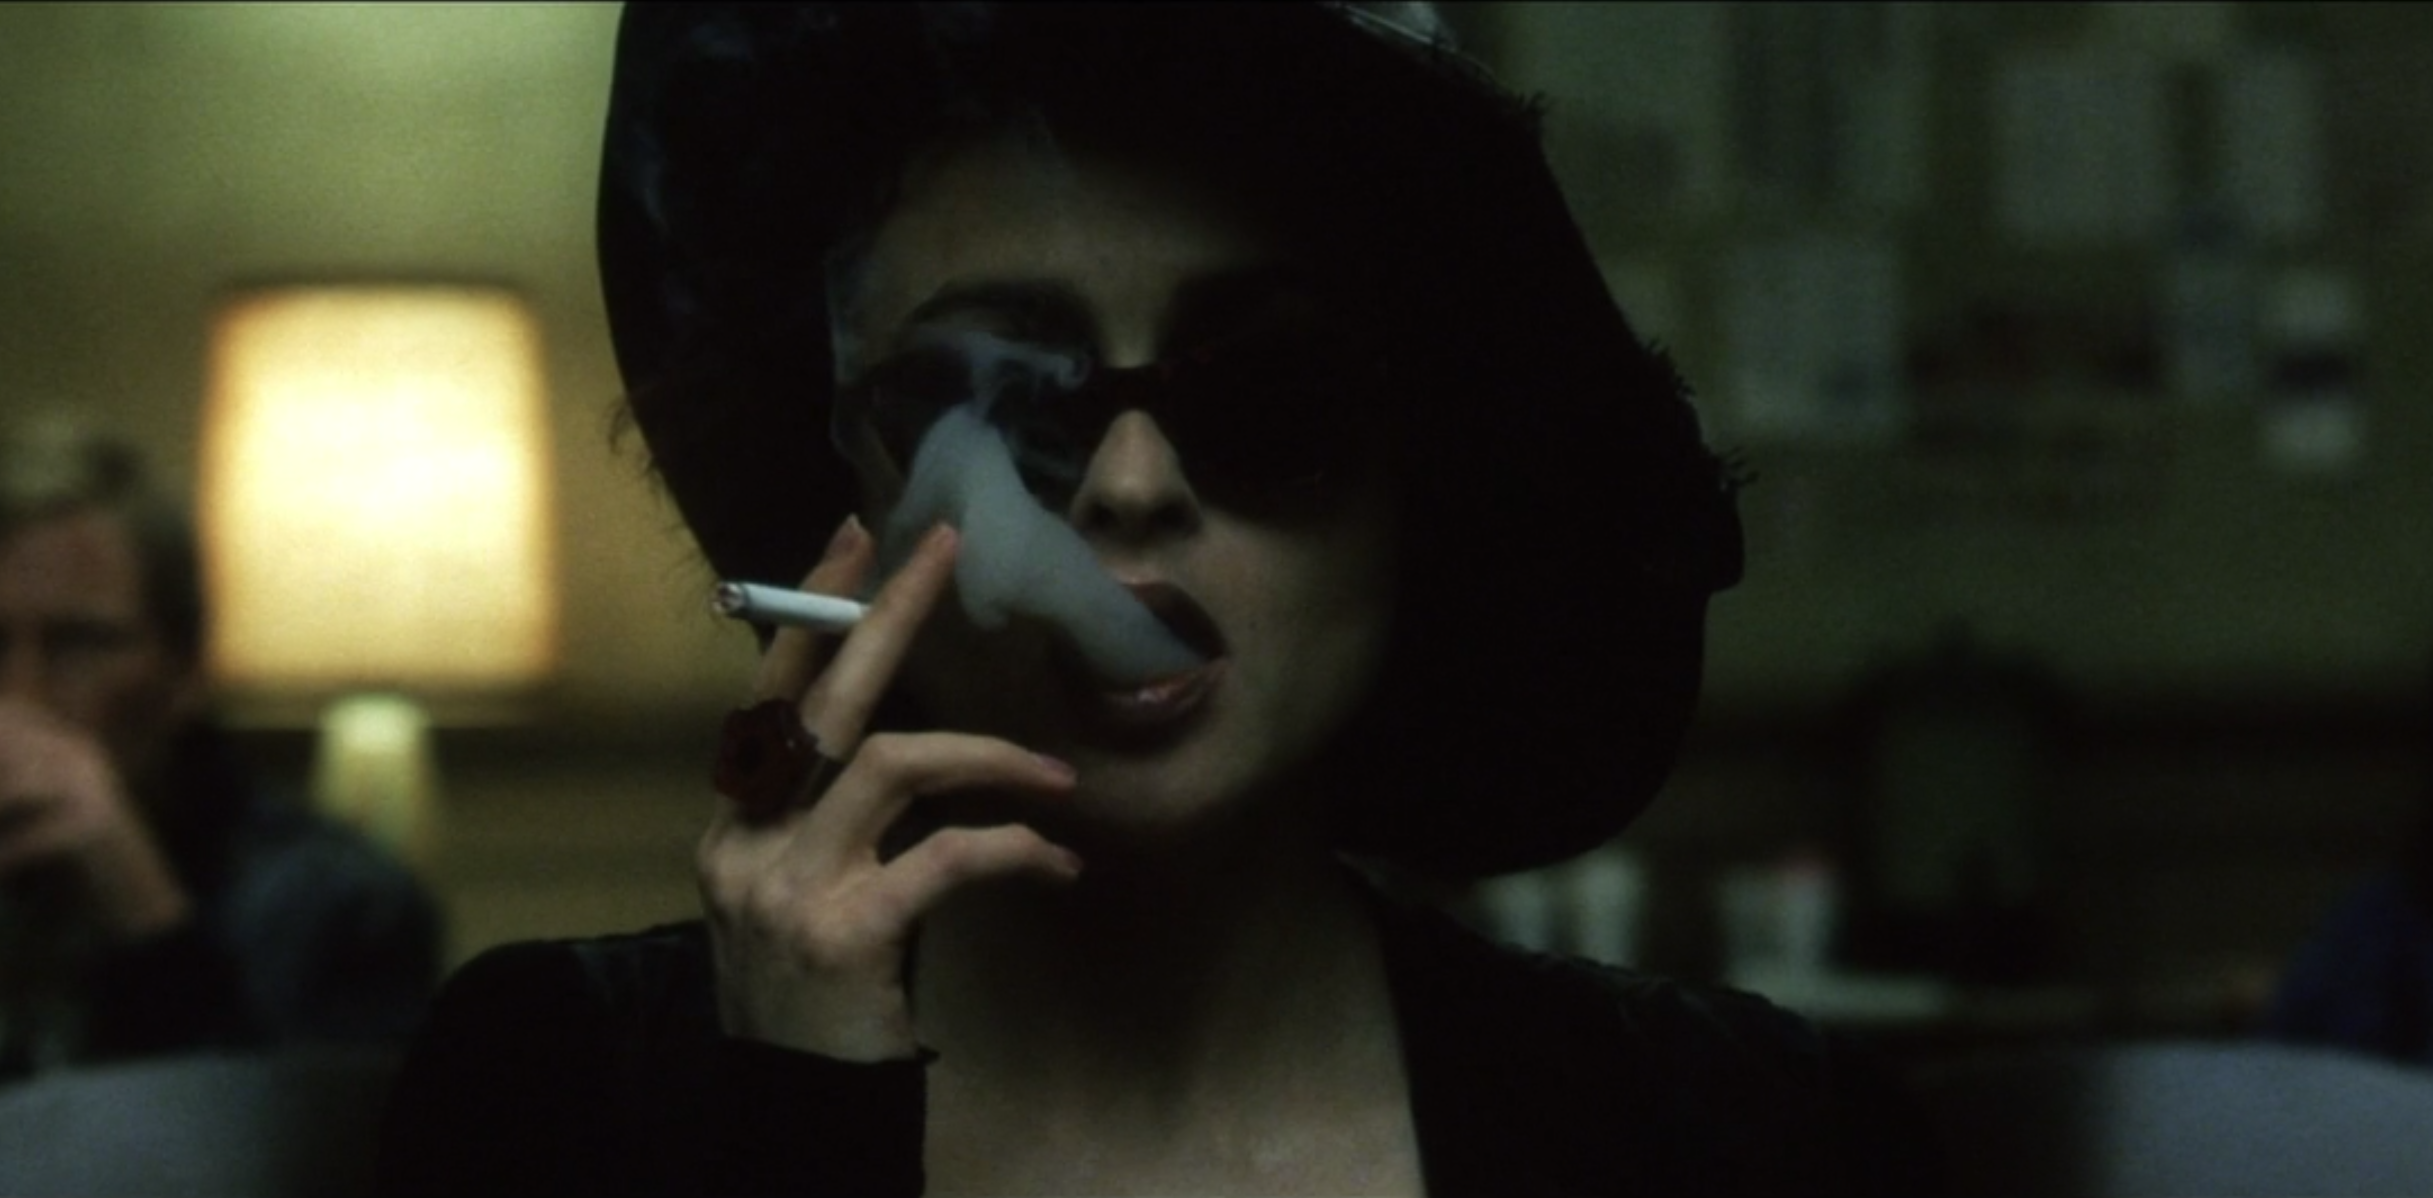 How the flamboyant fashion in 'Fight Club' defied the status quo